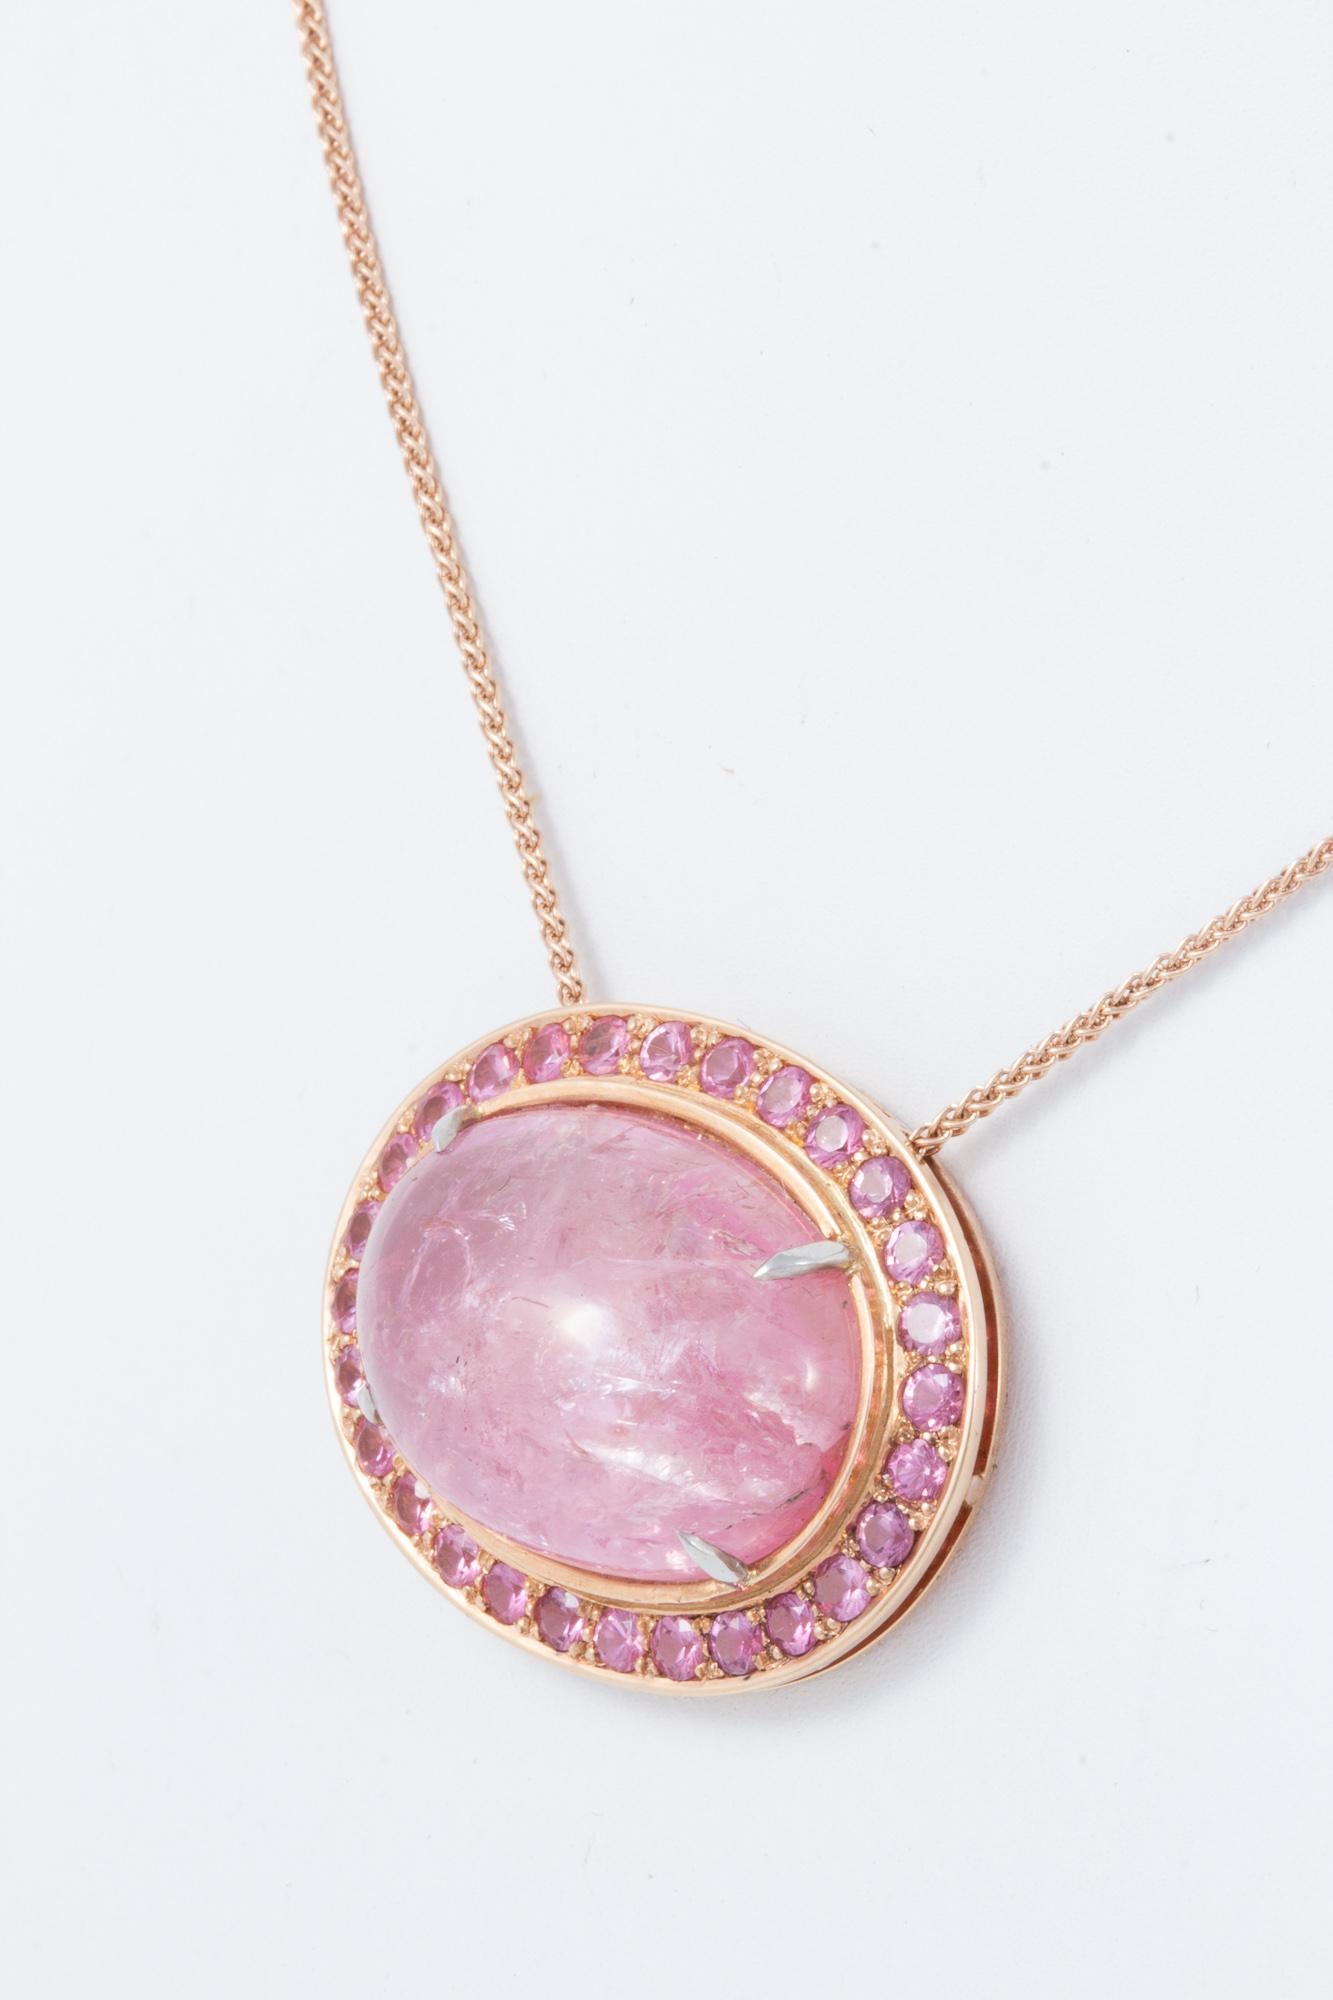 Rare Pink Fancy Tanzanite Cabochon Necklace in 18 kt Rose Gold 4